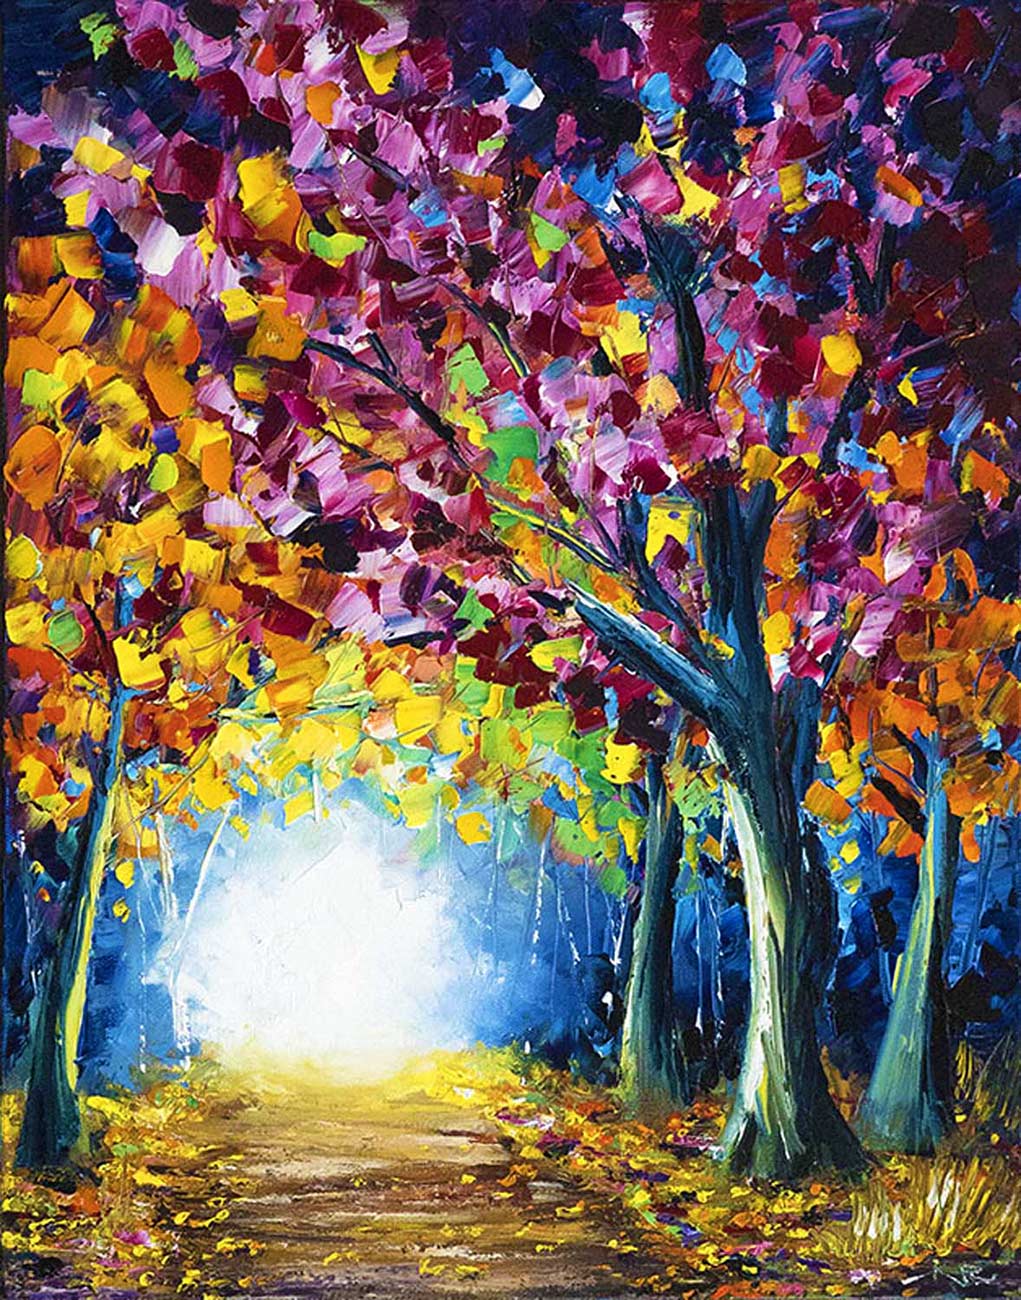 Original oil painting of vibrant fall foliage. This wall art of nature shows a rainbow of autumn leaf colors on a quiet forest path.